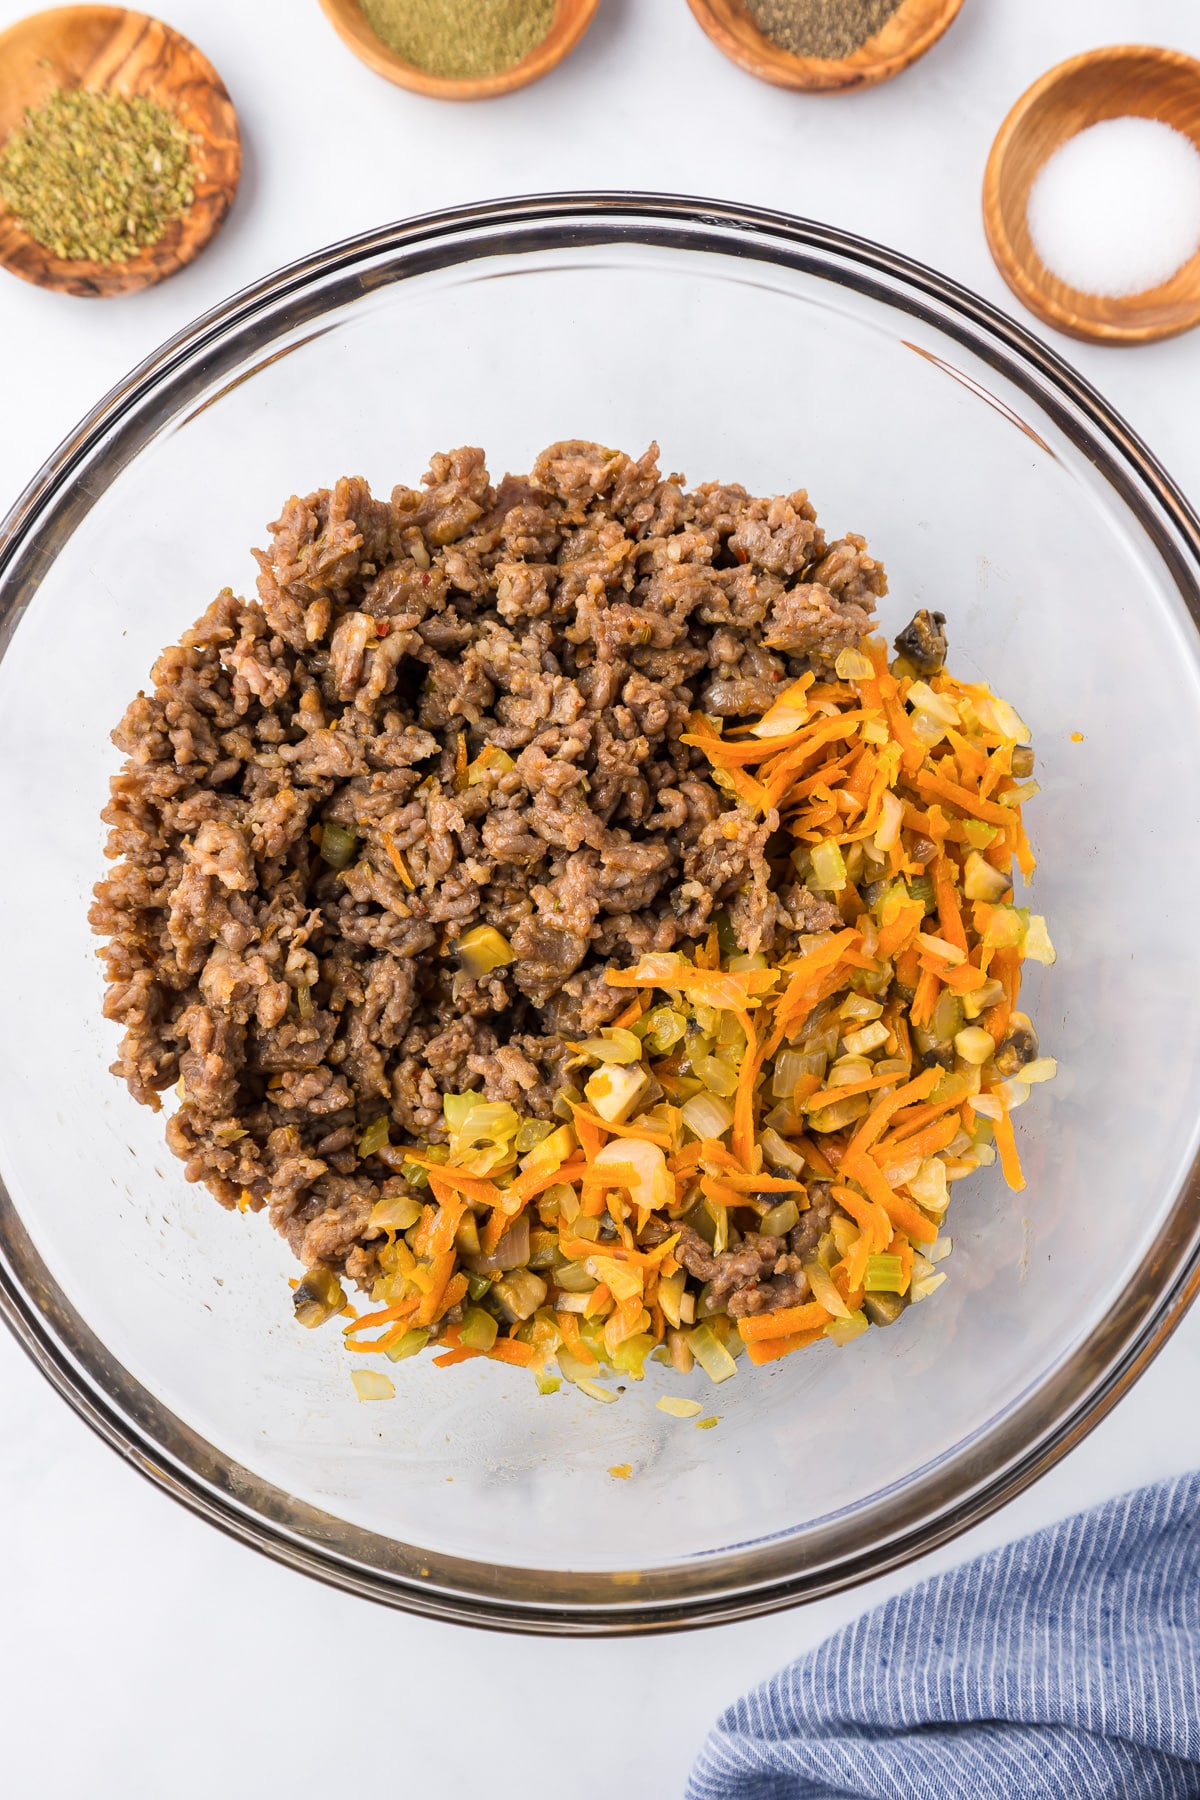 Ground beef, carrots and spices in a large bowl before mixing.